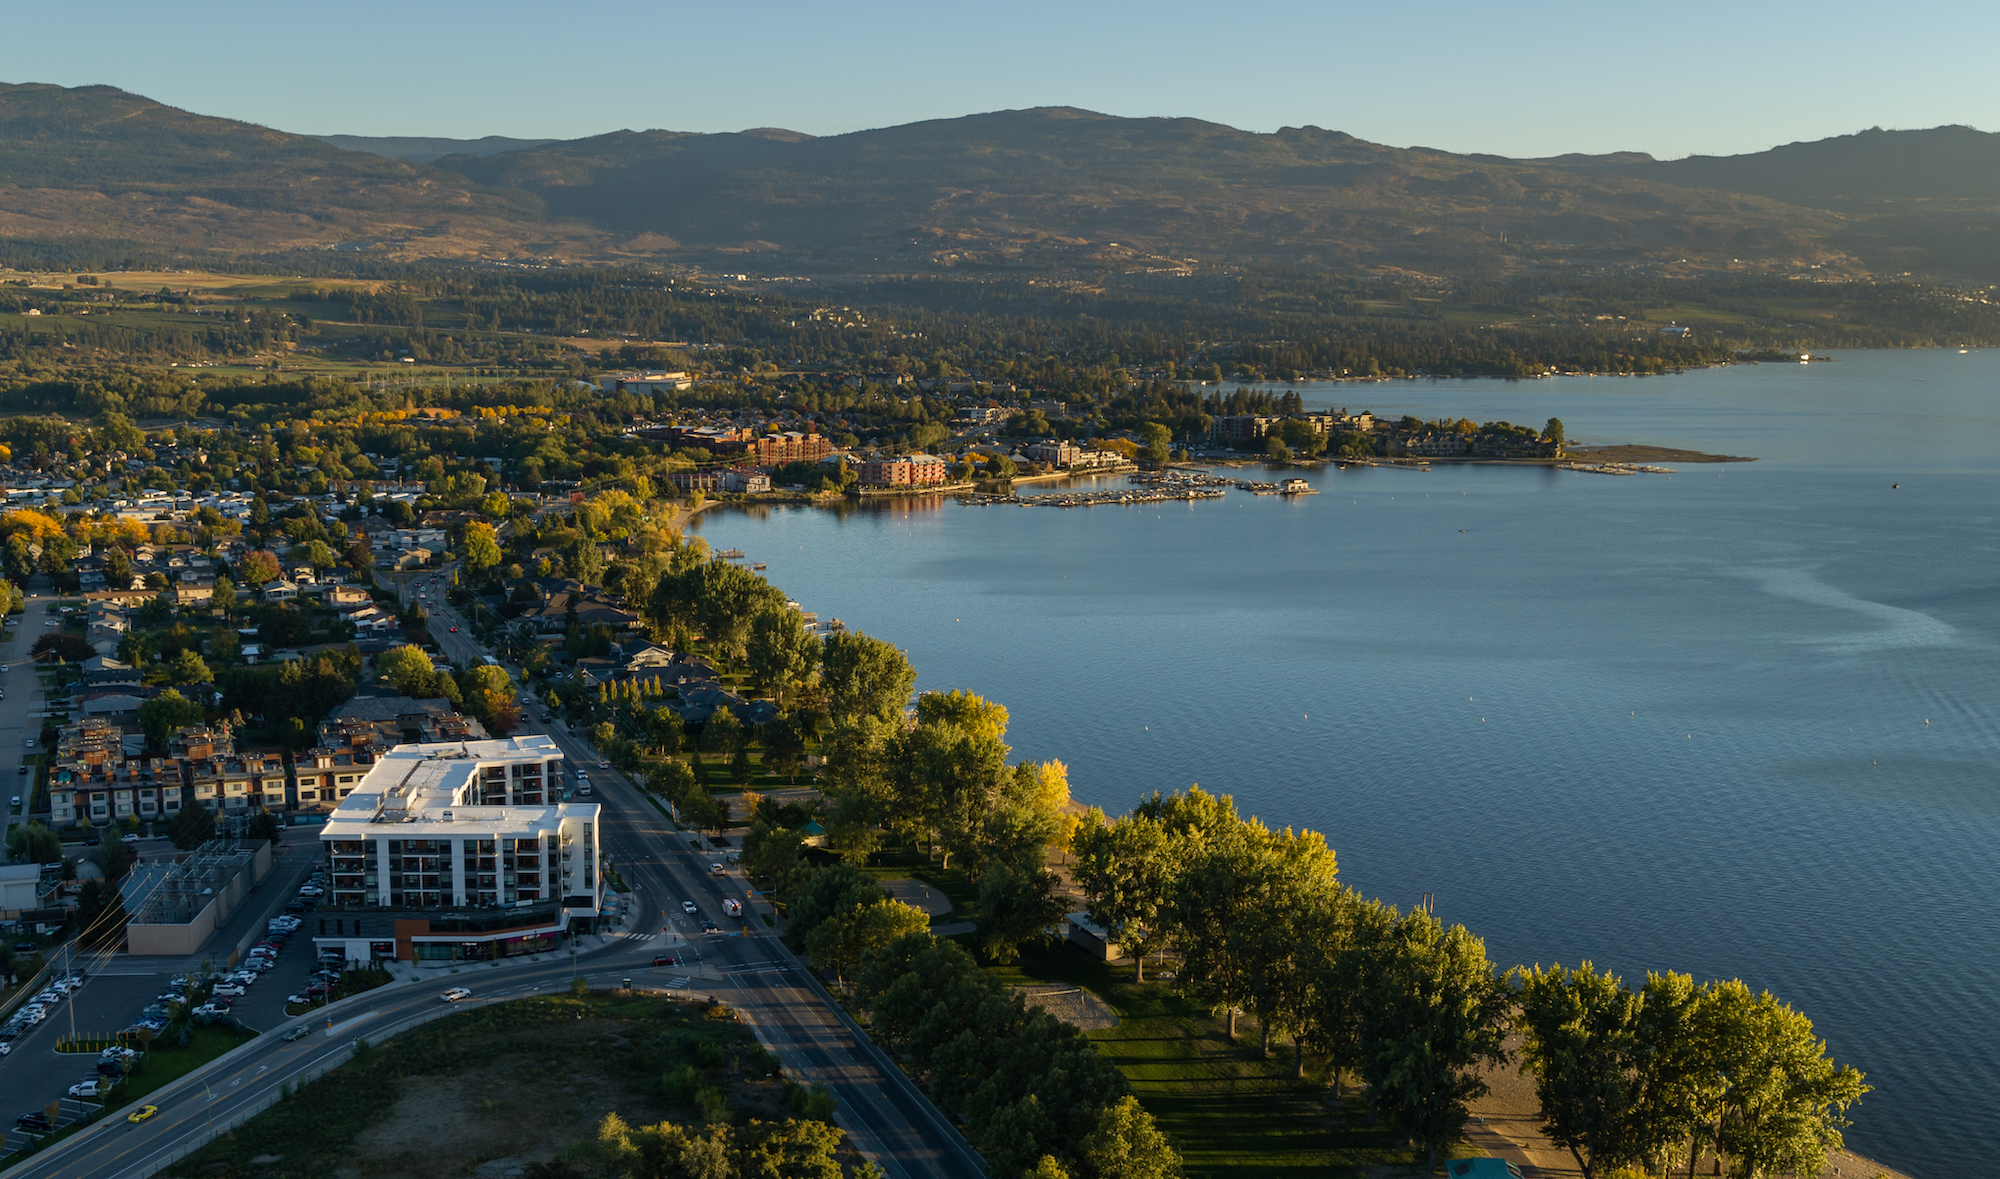 Vacation rental by Gyro Beach in Kelowna, The Shore, with Okanagan Lake in the background.